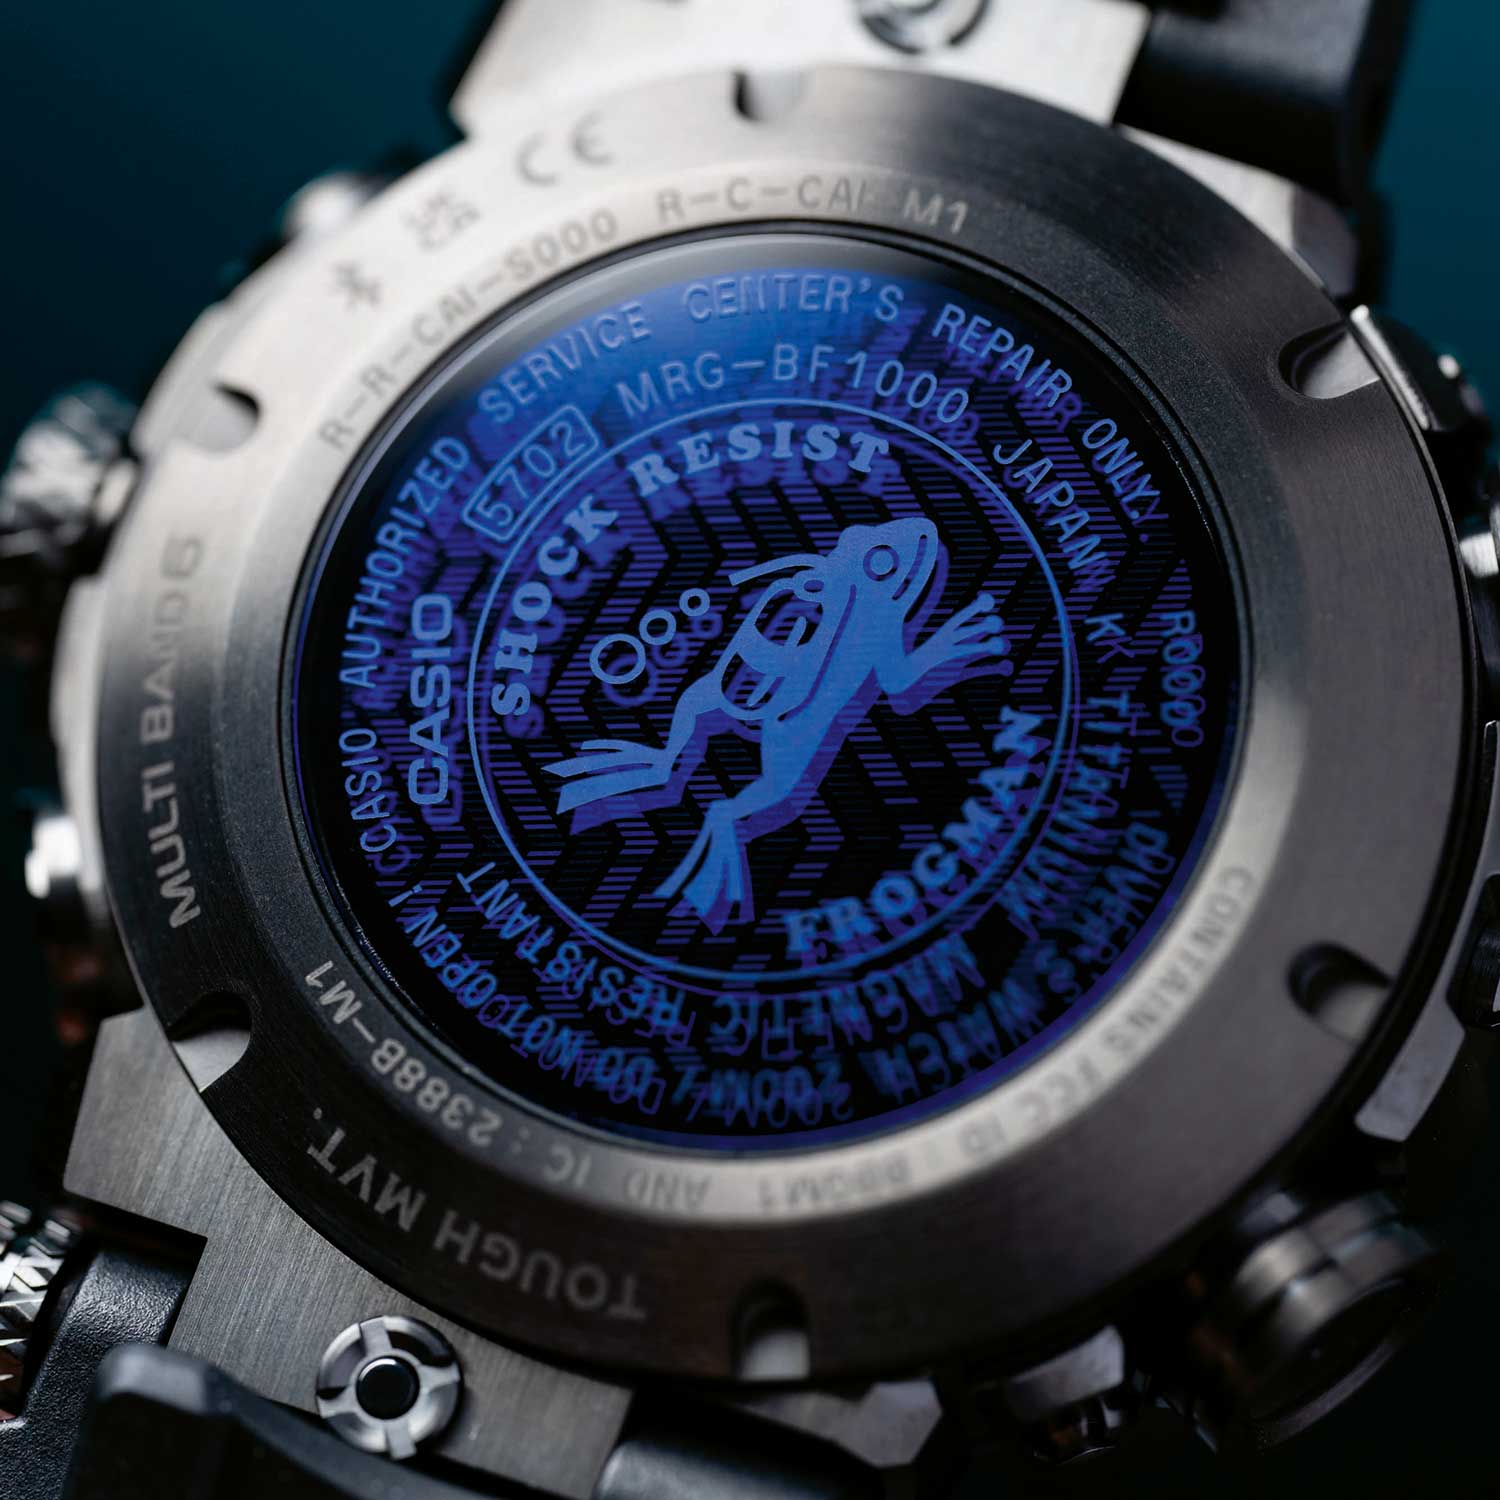 Vibrant blue case back that has a press fit sapphire crystal insert with blue vapor deposition and engraved with the diving frog character from the first-generation of Casio G-SHOCK Frogman watches (Image: Peter Tung)